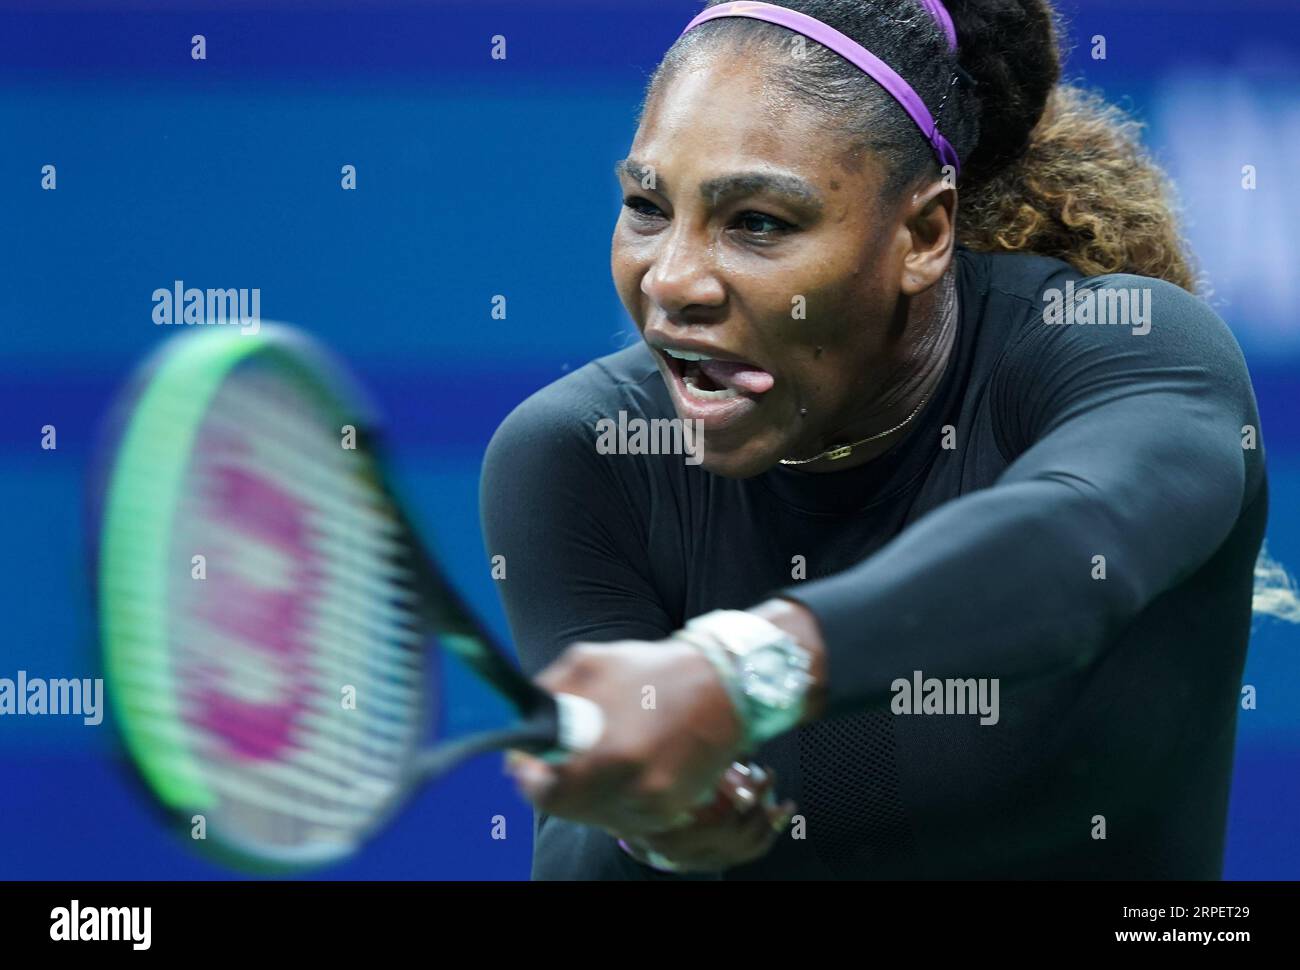 (190904) -- NEW YORK, Sept. 4, 2019 -- Serena Williams hits a return during the women s singles quarterfinal match between Wang Qiang of China and Serena Williams of the United States at the 2019 US Open in New York, the United States, Sept. 3, 2019. ) (SP)US-NEW YORK-TENNIS-US OPEN-WOMEN S SINGLES LiuxJie PUBLICATIONxNOTxINxCHN Stock Photo